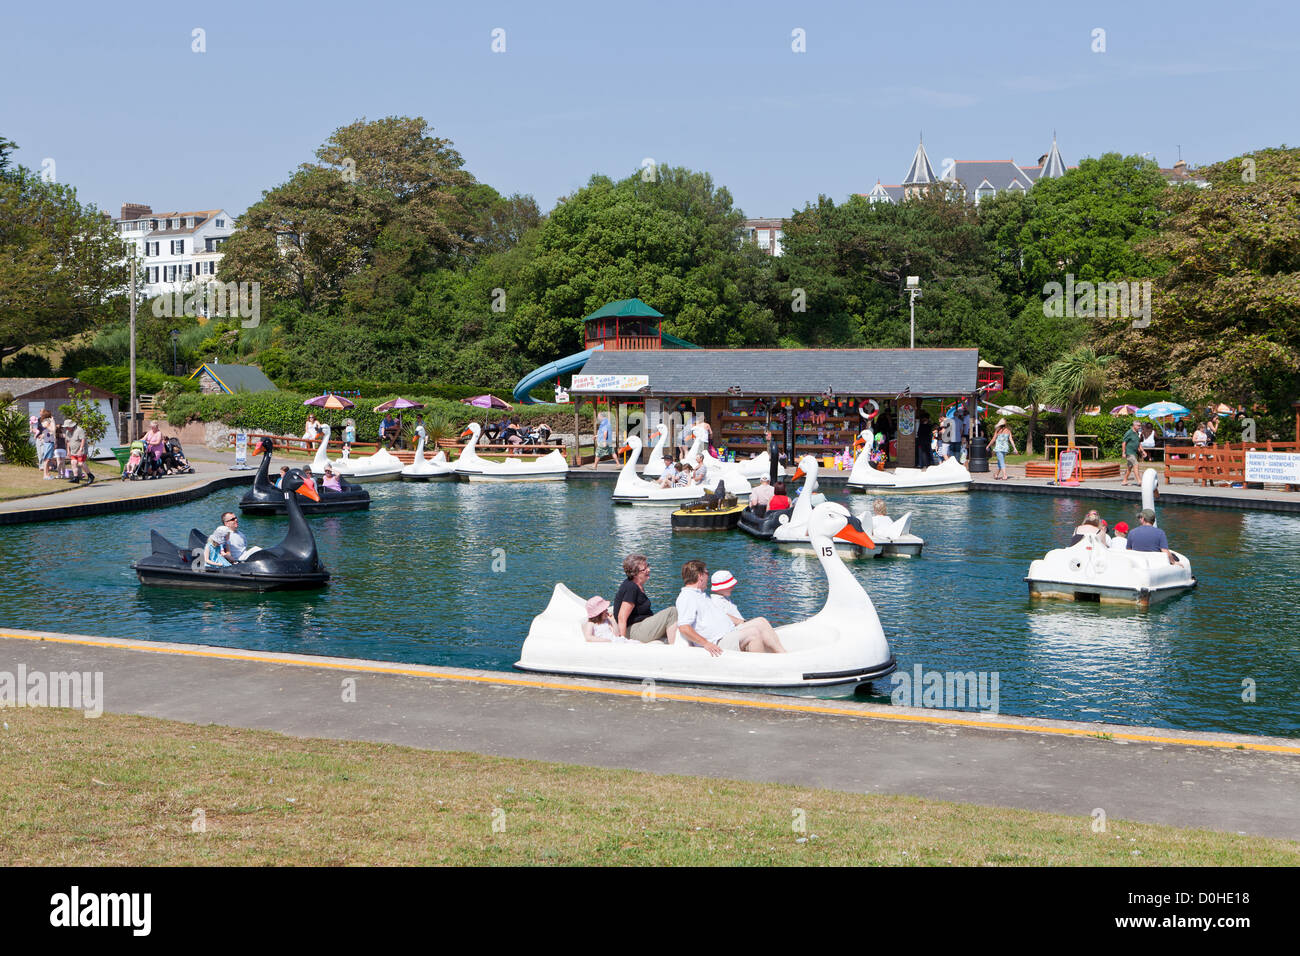 People enjoying a sunny day on the fab swan boat pool in the Exmouth Fun Park on Queen's Drive, Exmouth, UK Stock Photo